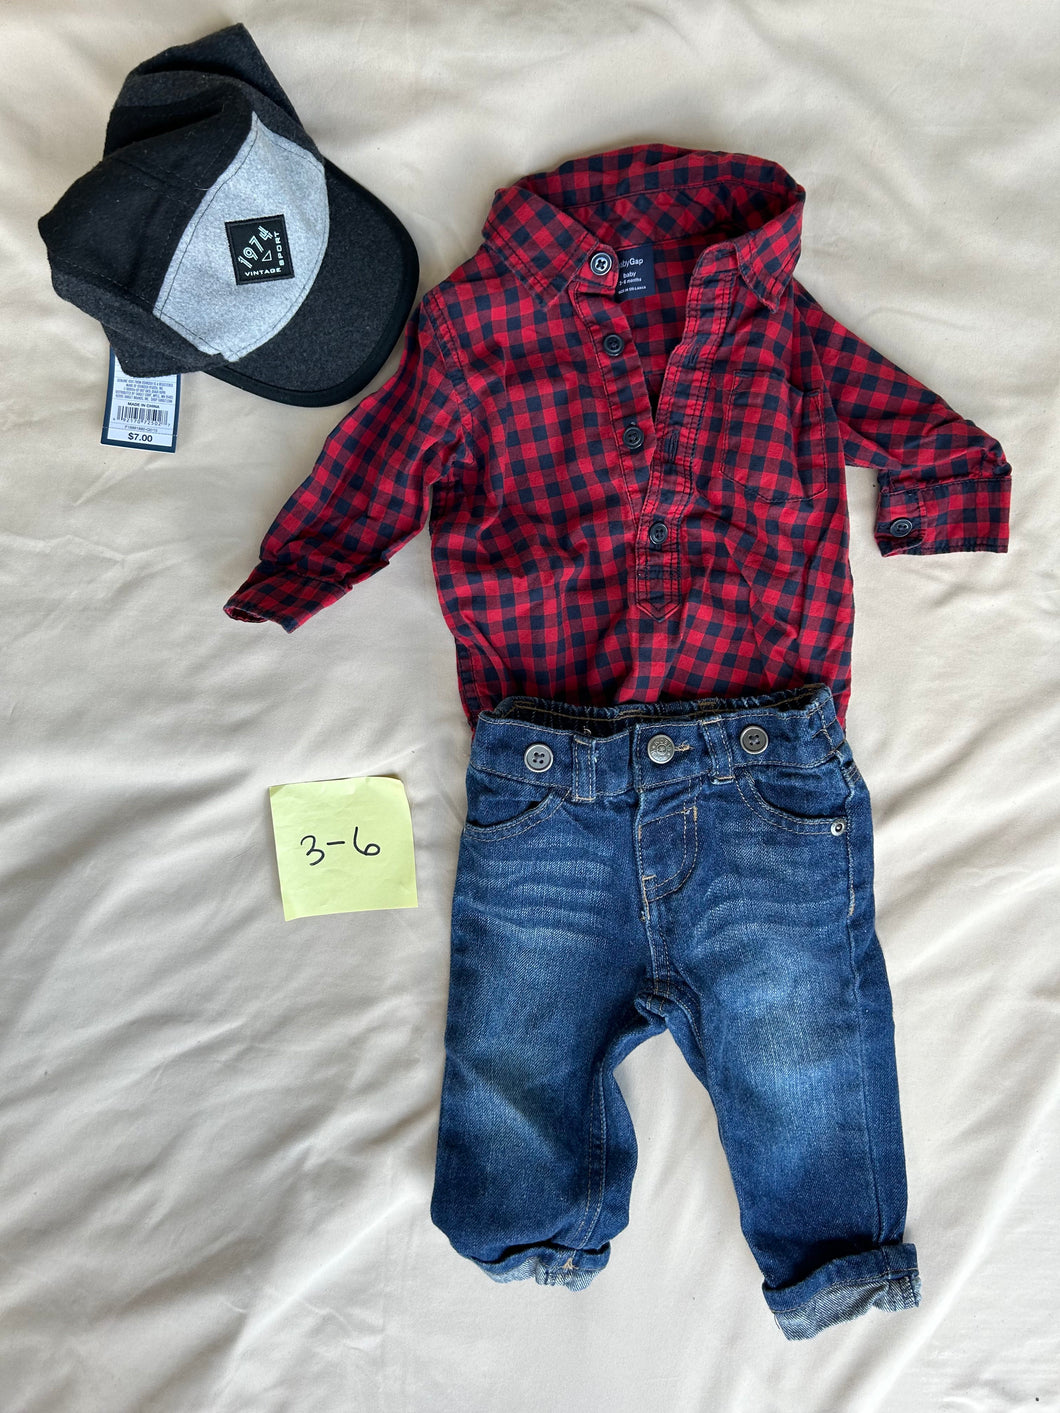 baby gap dress shirt, jeans and brand new hat w tag 3 months